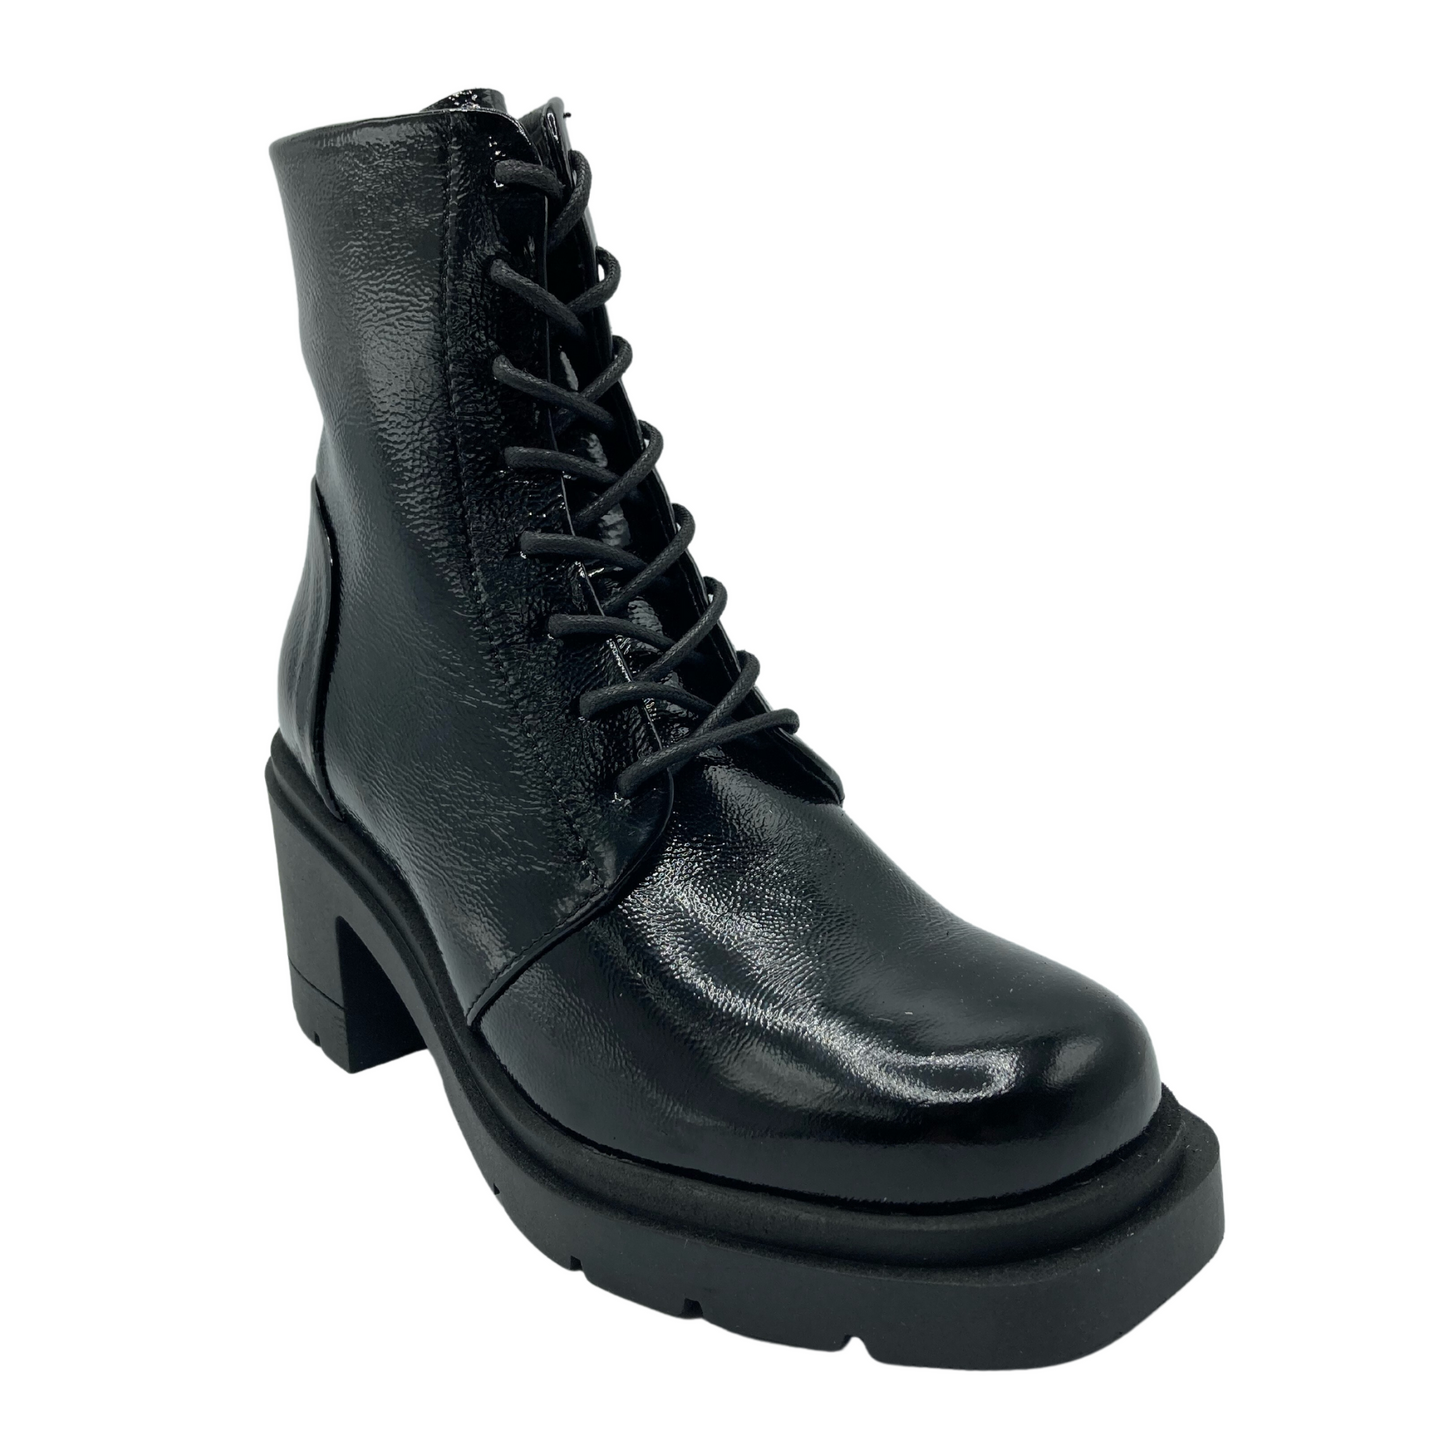 45 degree angled view of black patent leather calf-height boot with matching laces and rubber outsole